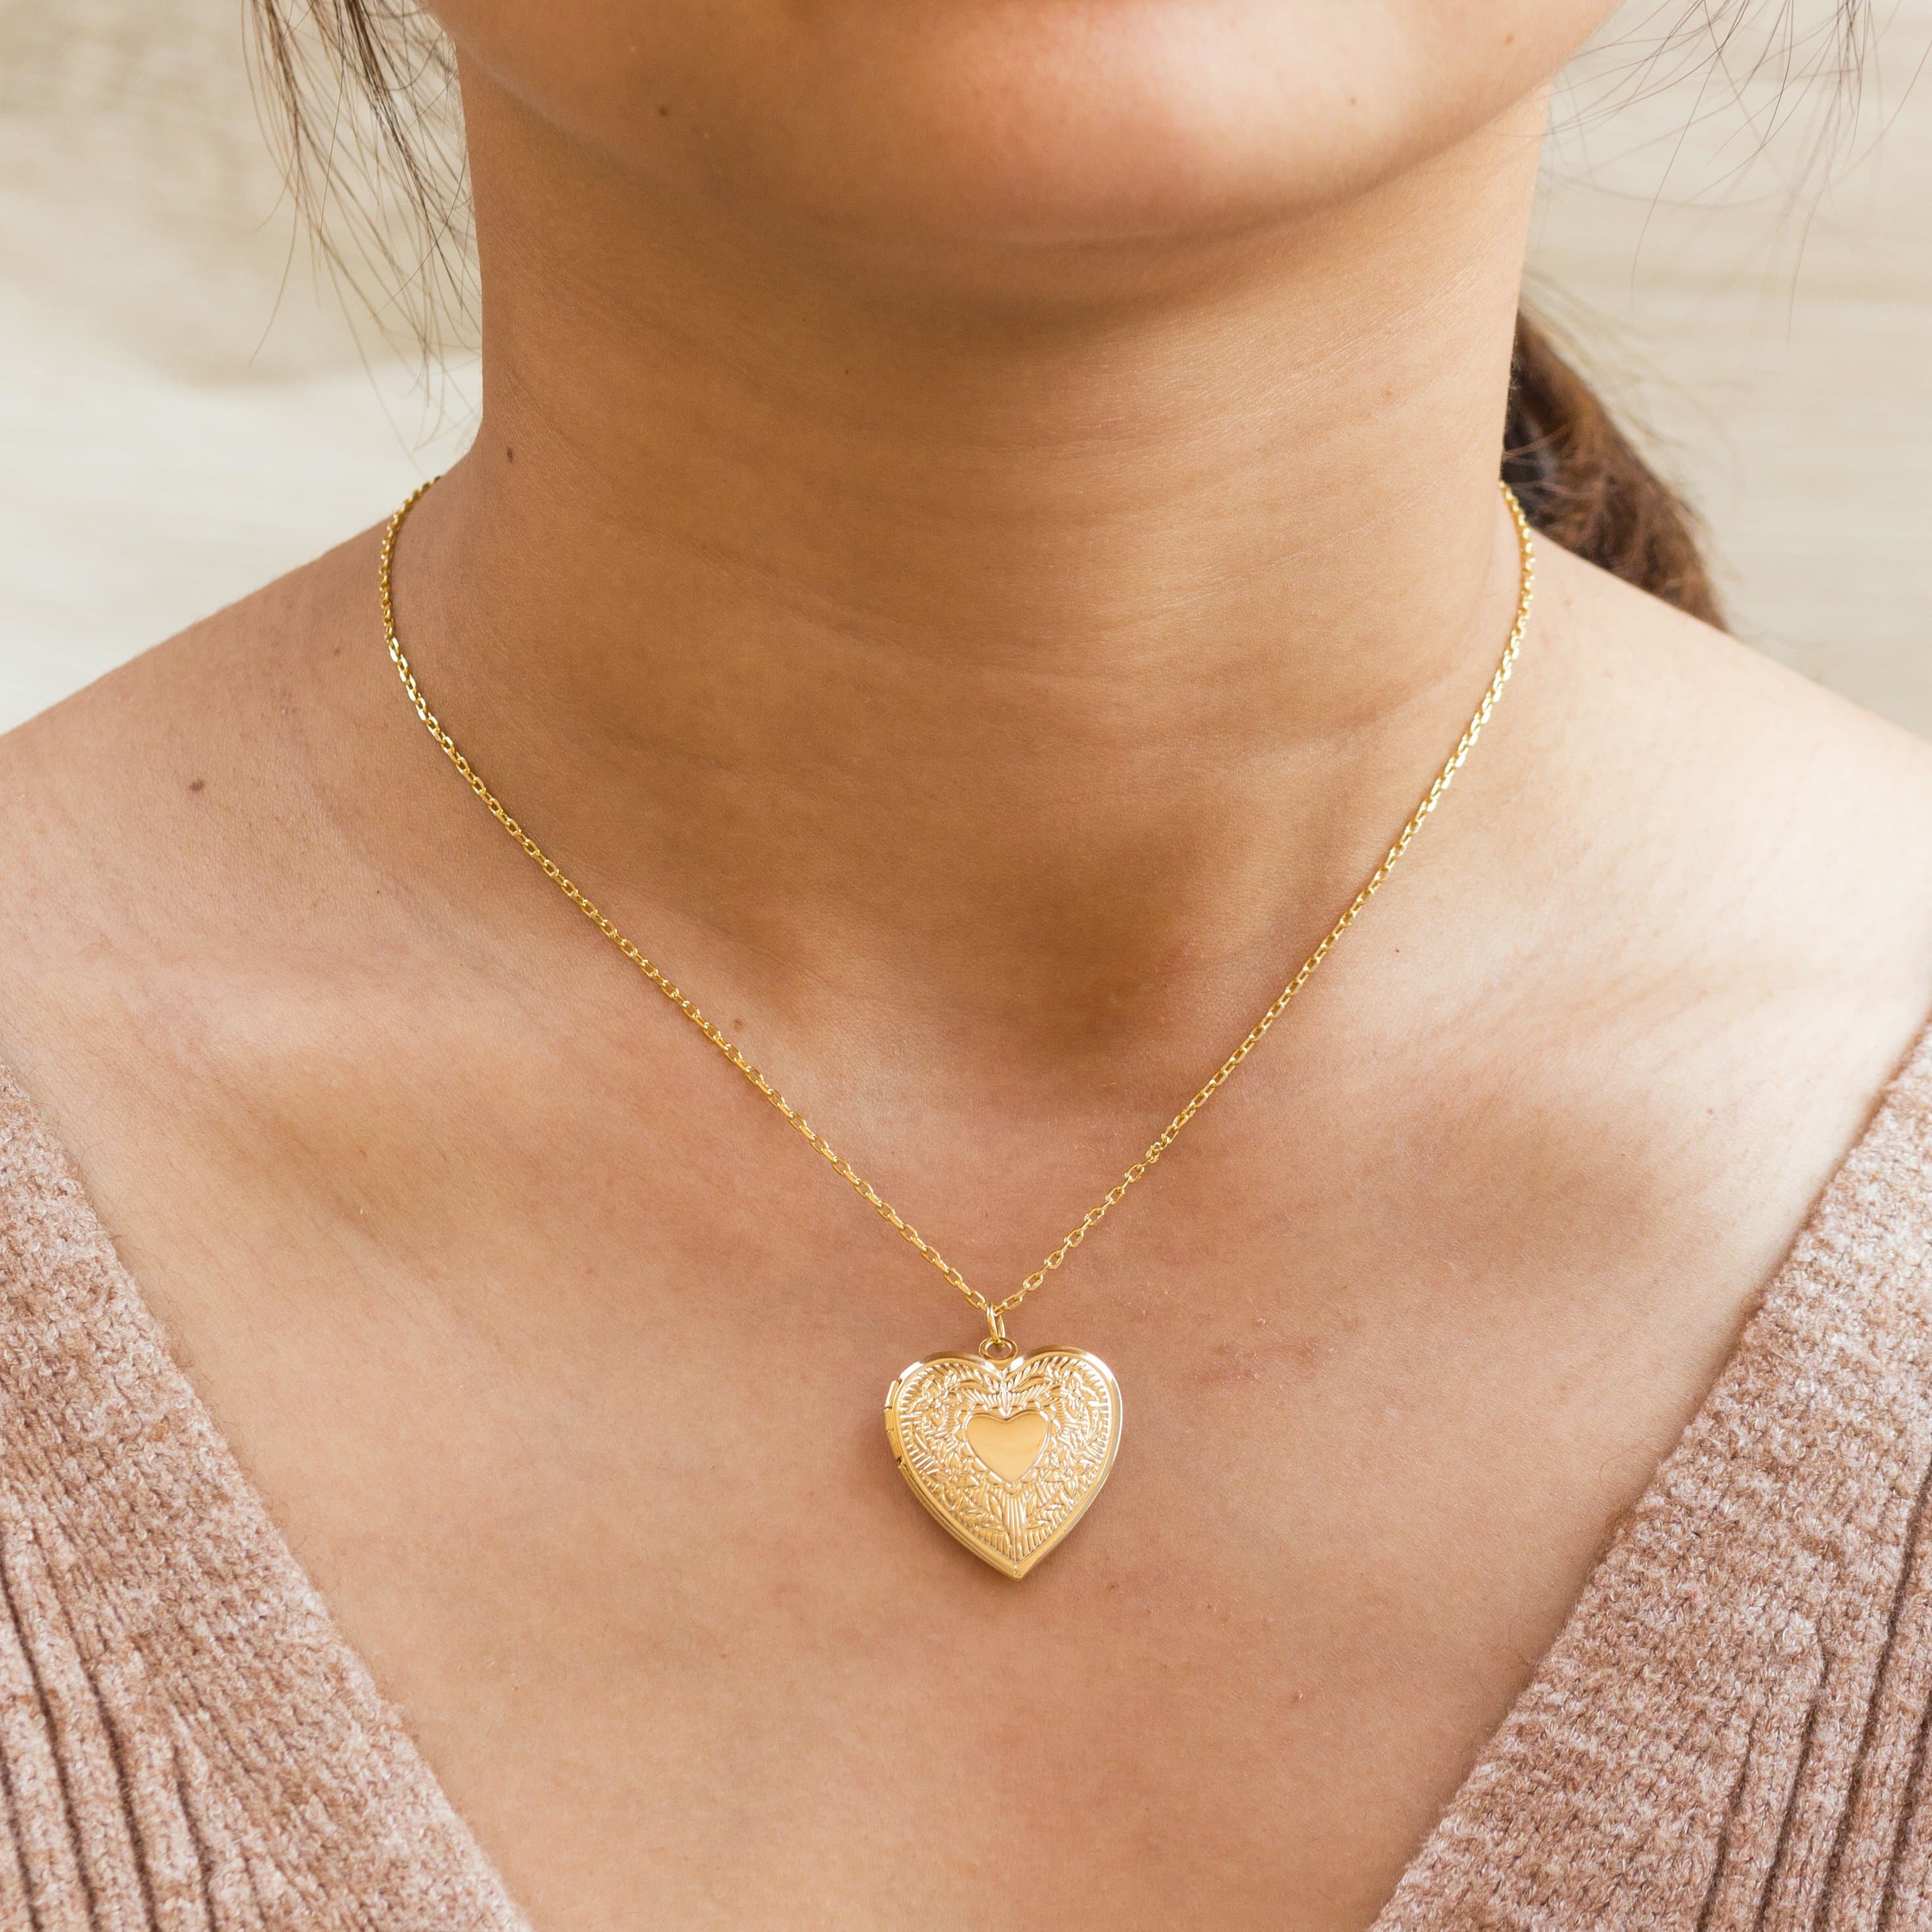 Gold Plated Heart Locket